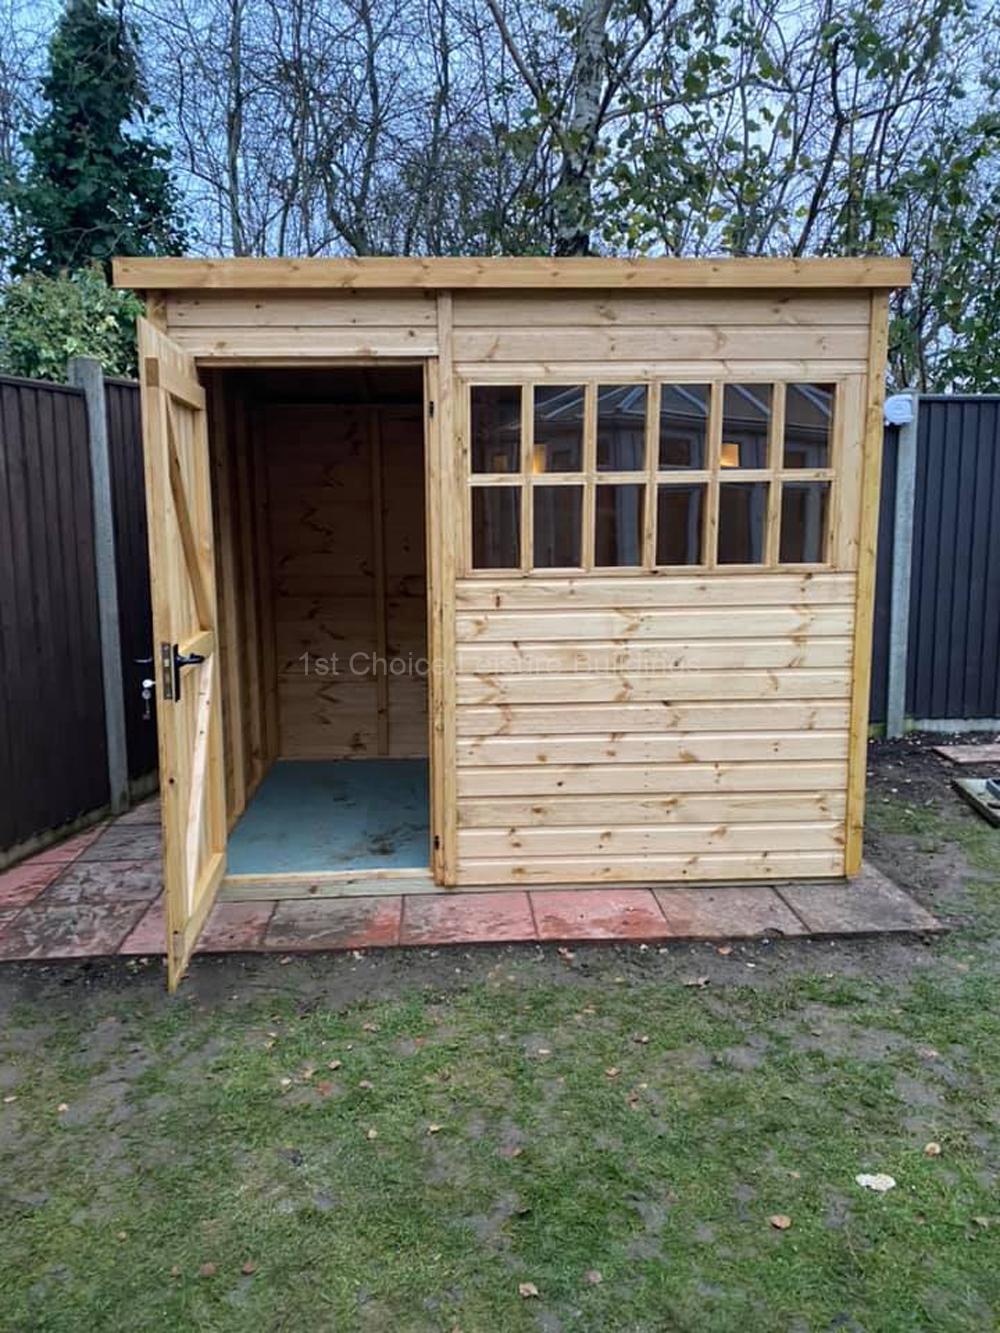 1st Choice Diamond Chichester Apex Pent Made To Measure Garden Shed With Free Fitting 64